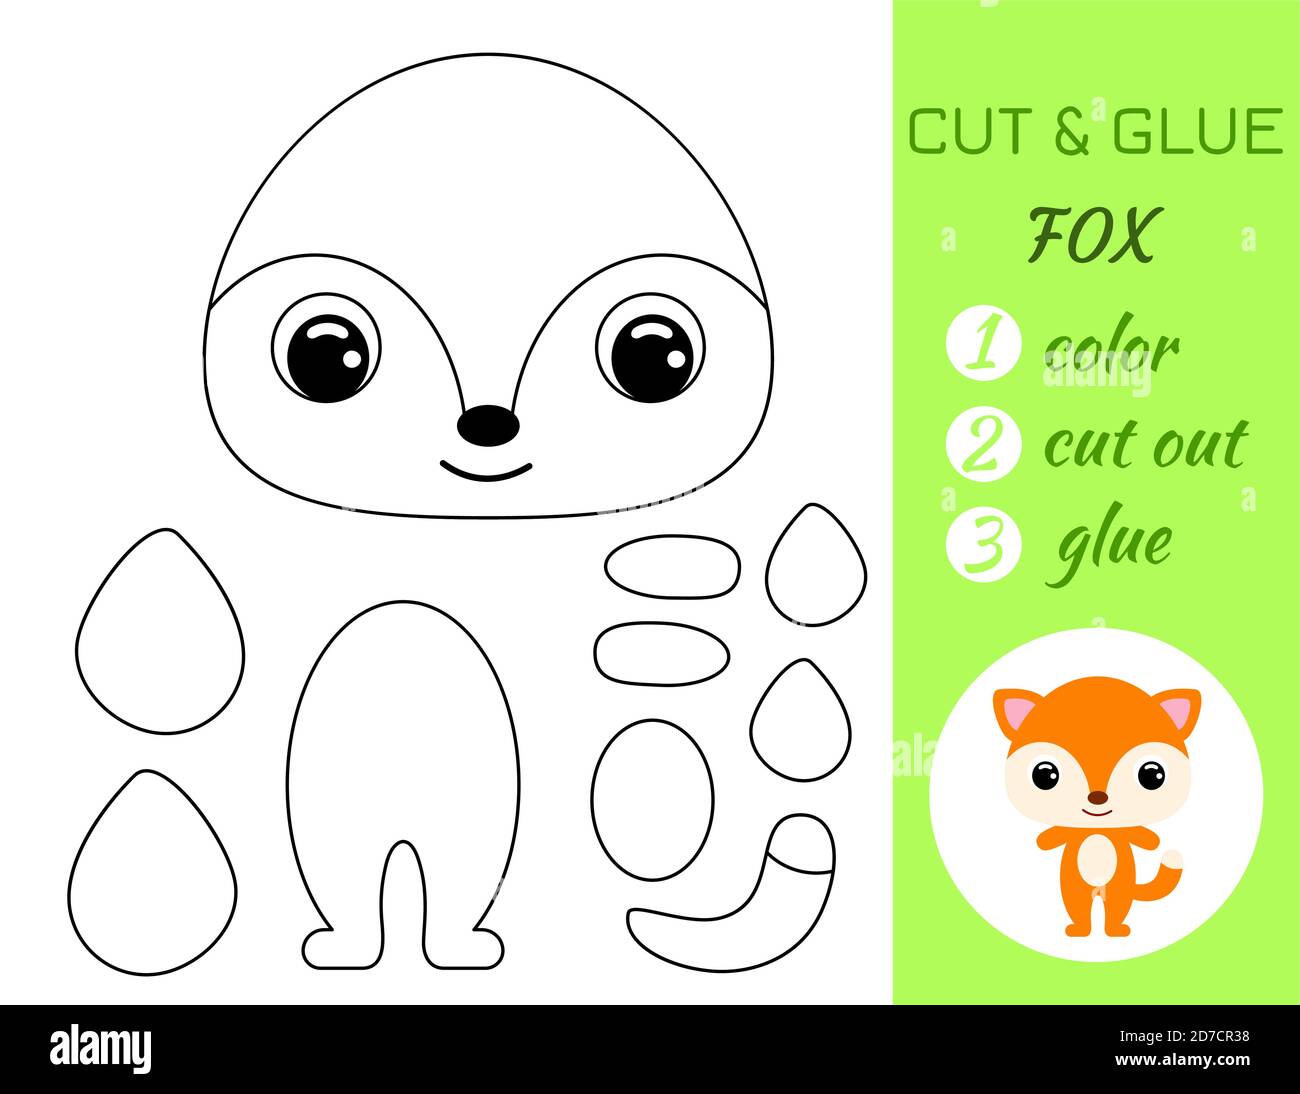 Color, Cut and Paste Activity Worksheet for Kids